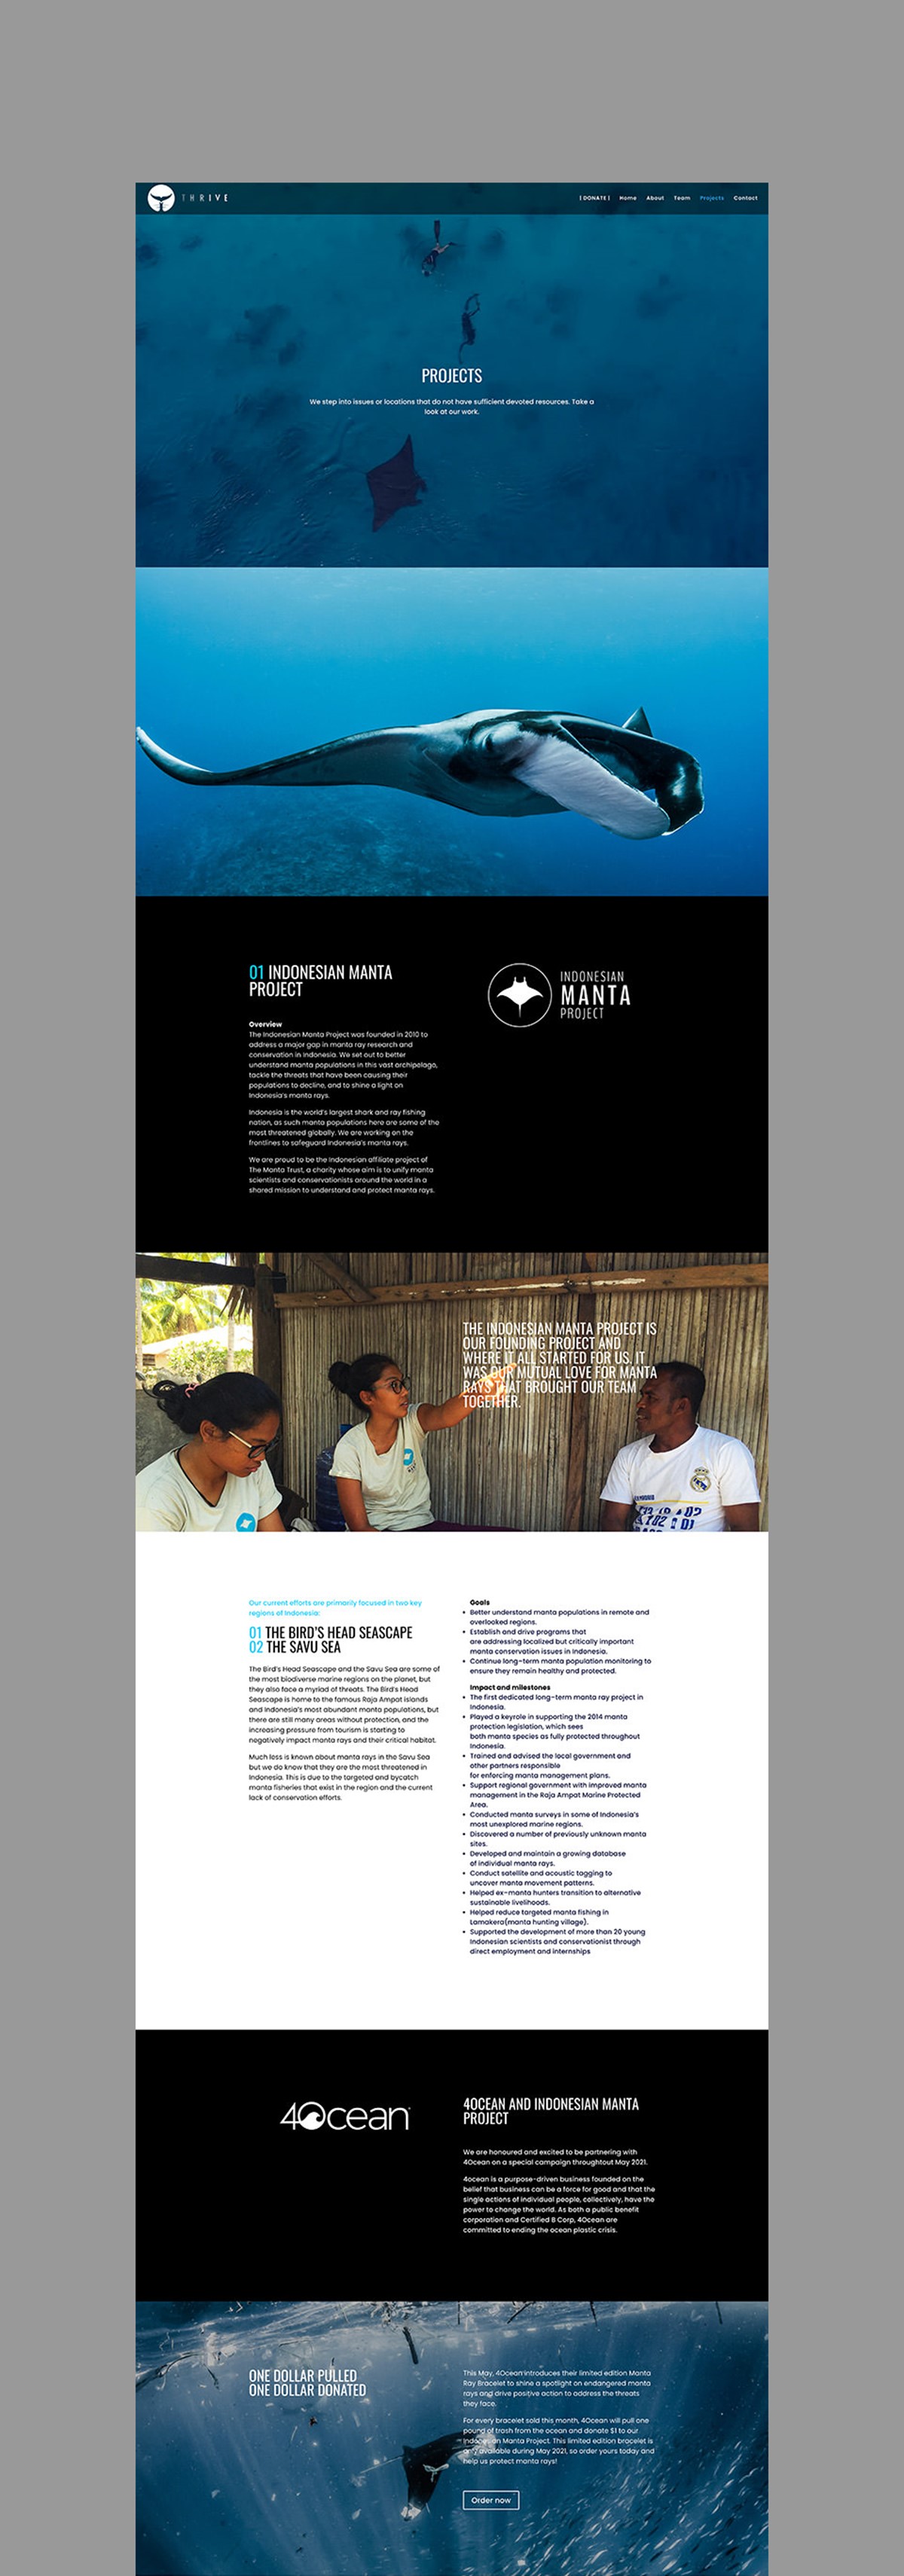 Thrive Conservation. Website. Projects page 1. Website design by Superfried.